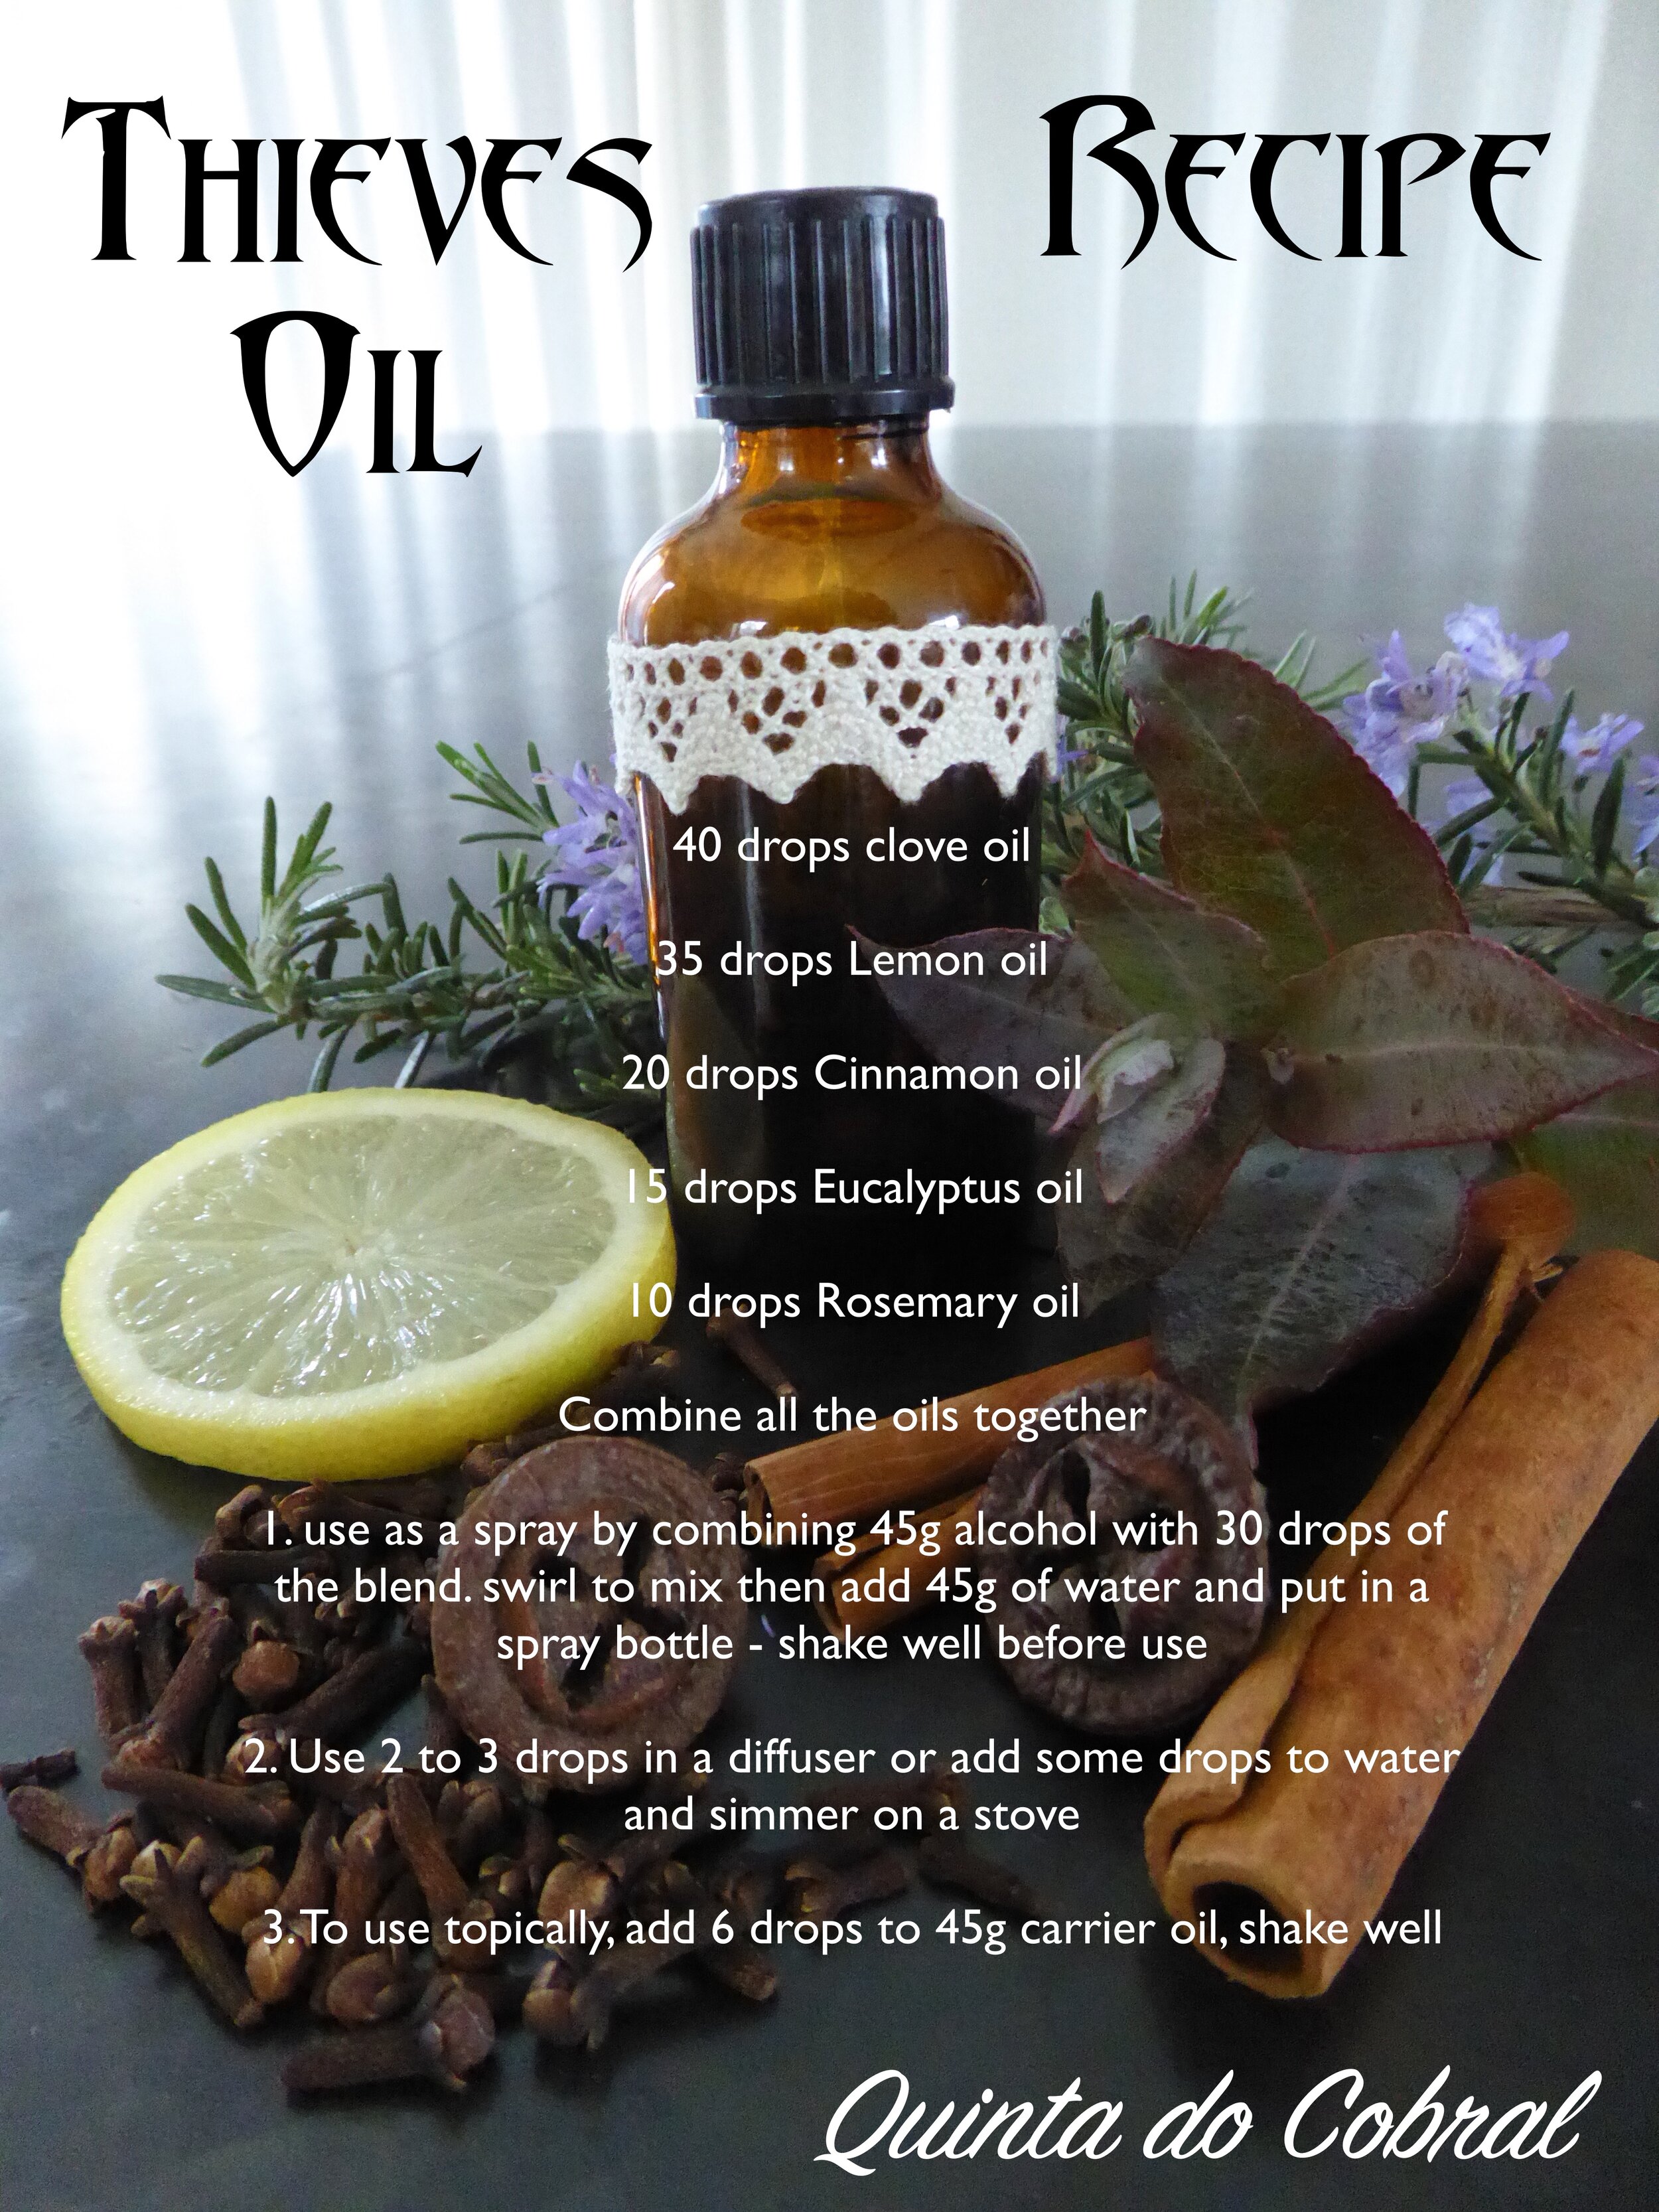 How to Make Thieves Oil Recipe and Uses